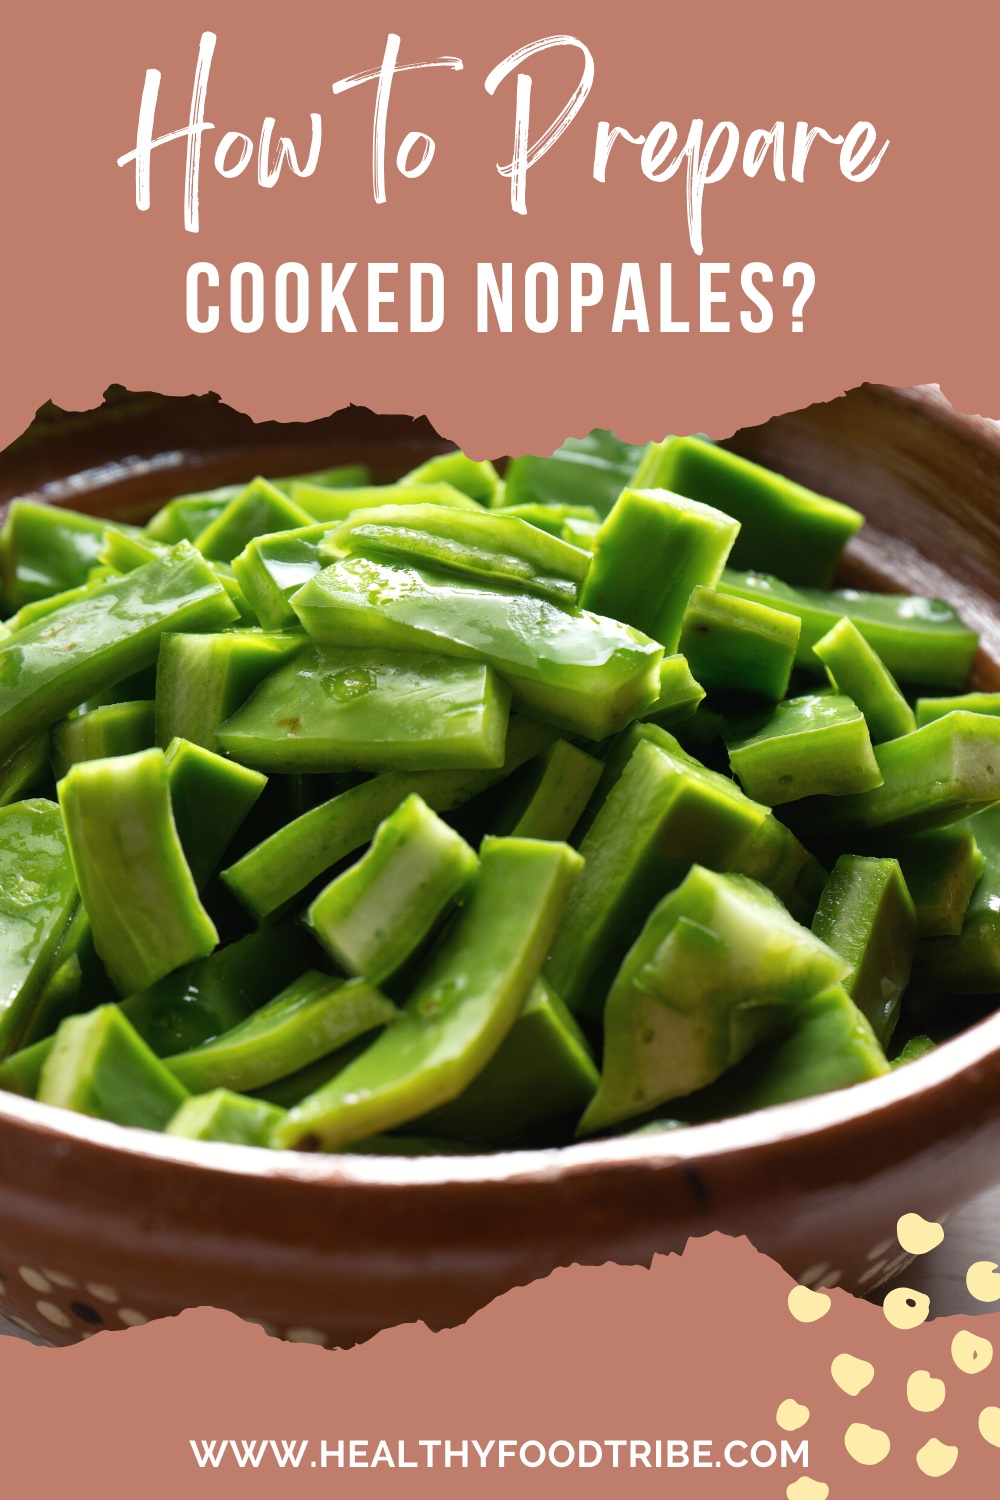 How to prepare cooked nopales